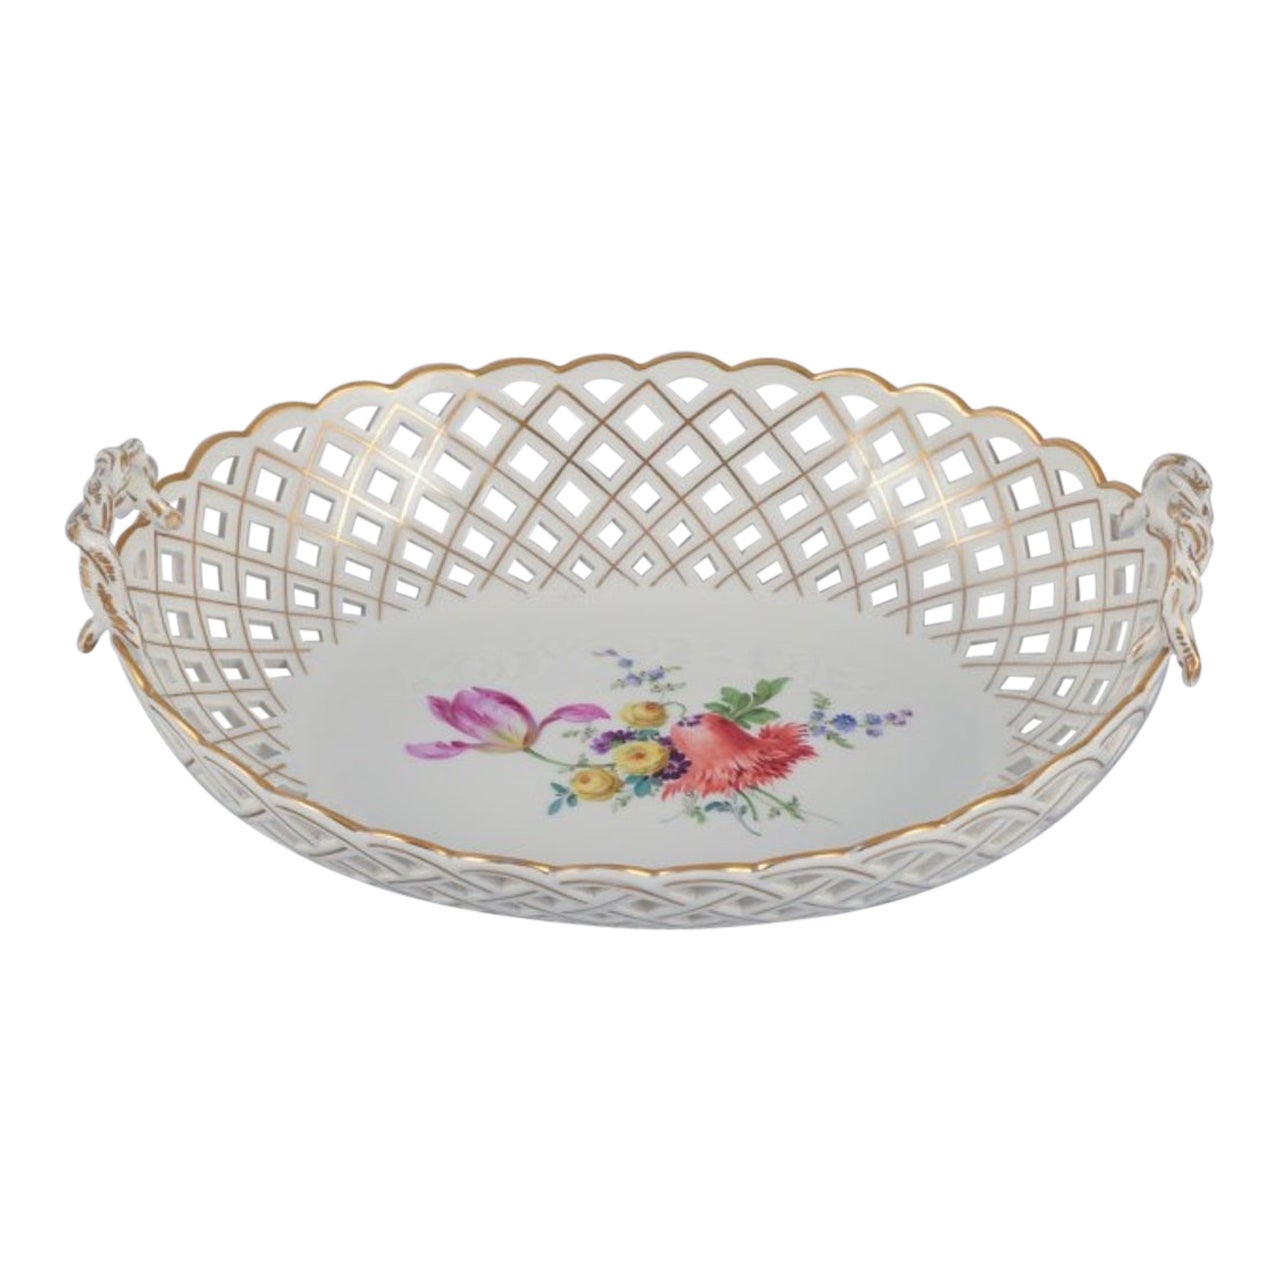 Meissen, Germany. Colossal open lace oval bowl in porcelain. For Sale